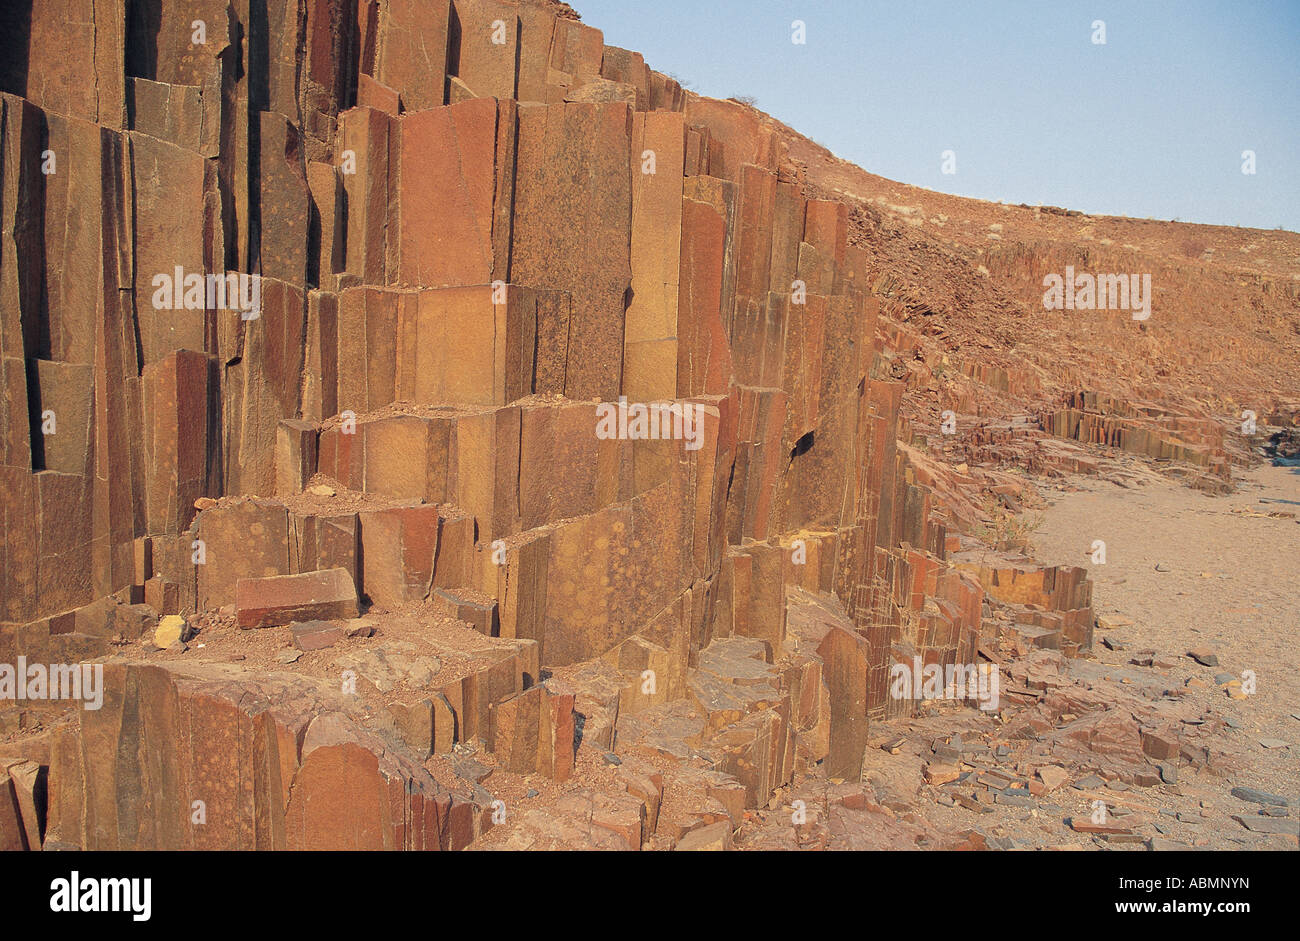 Organ Pipes shale rock formation dating back about 120 million years Twyfelfontein Damaraland Namibia Stock Photo